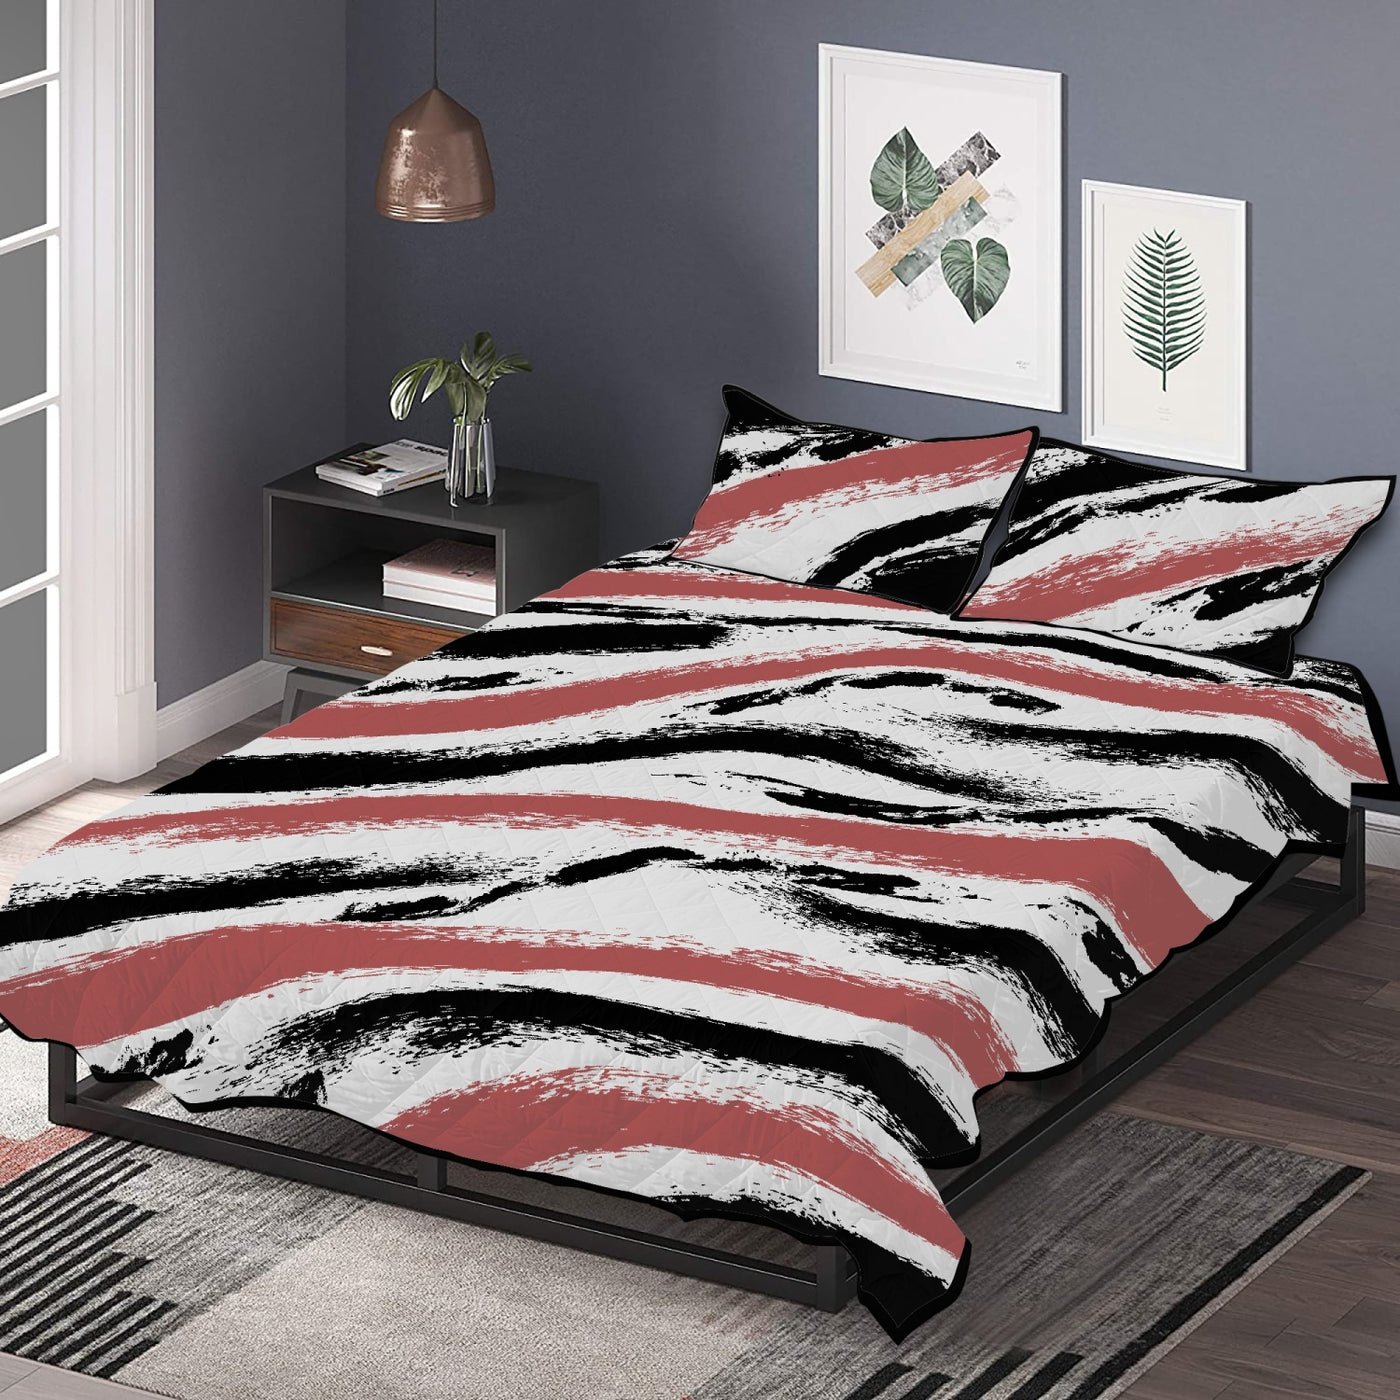 Brush Strokes 1366 - Polyester Quilt Bed Sets